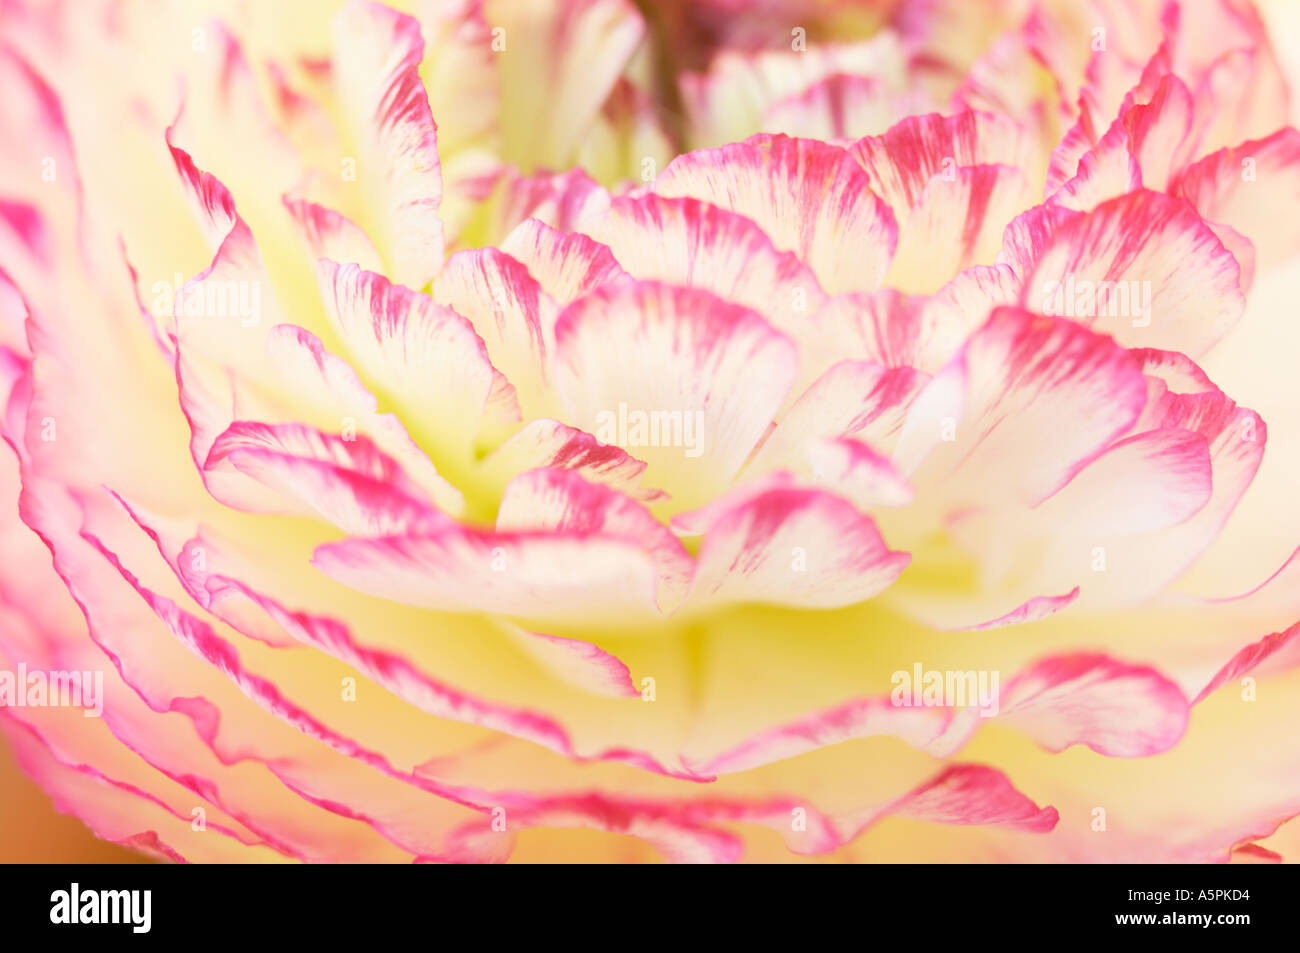 England, UK. A close up of a single pink and white bloom of Ranunculus 'Accolade Mix' Stock Photo